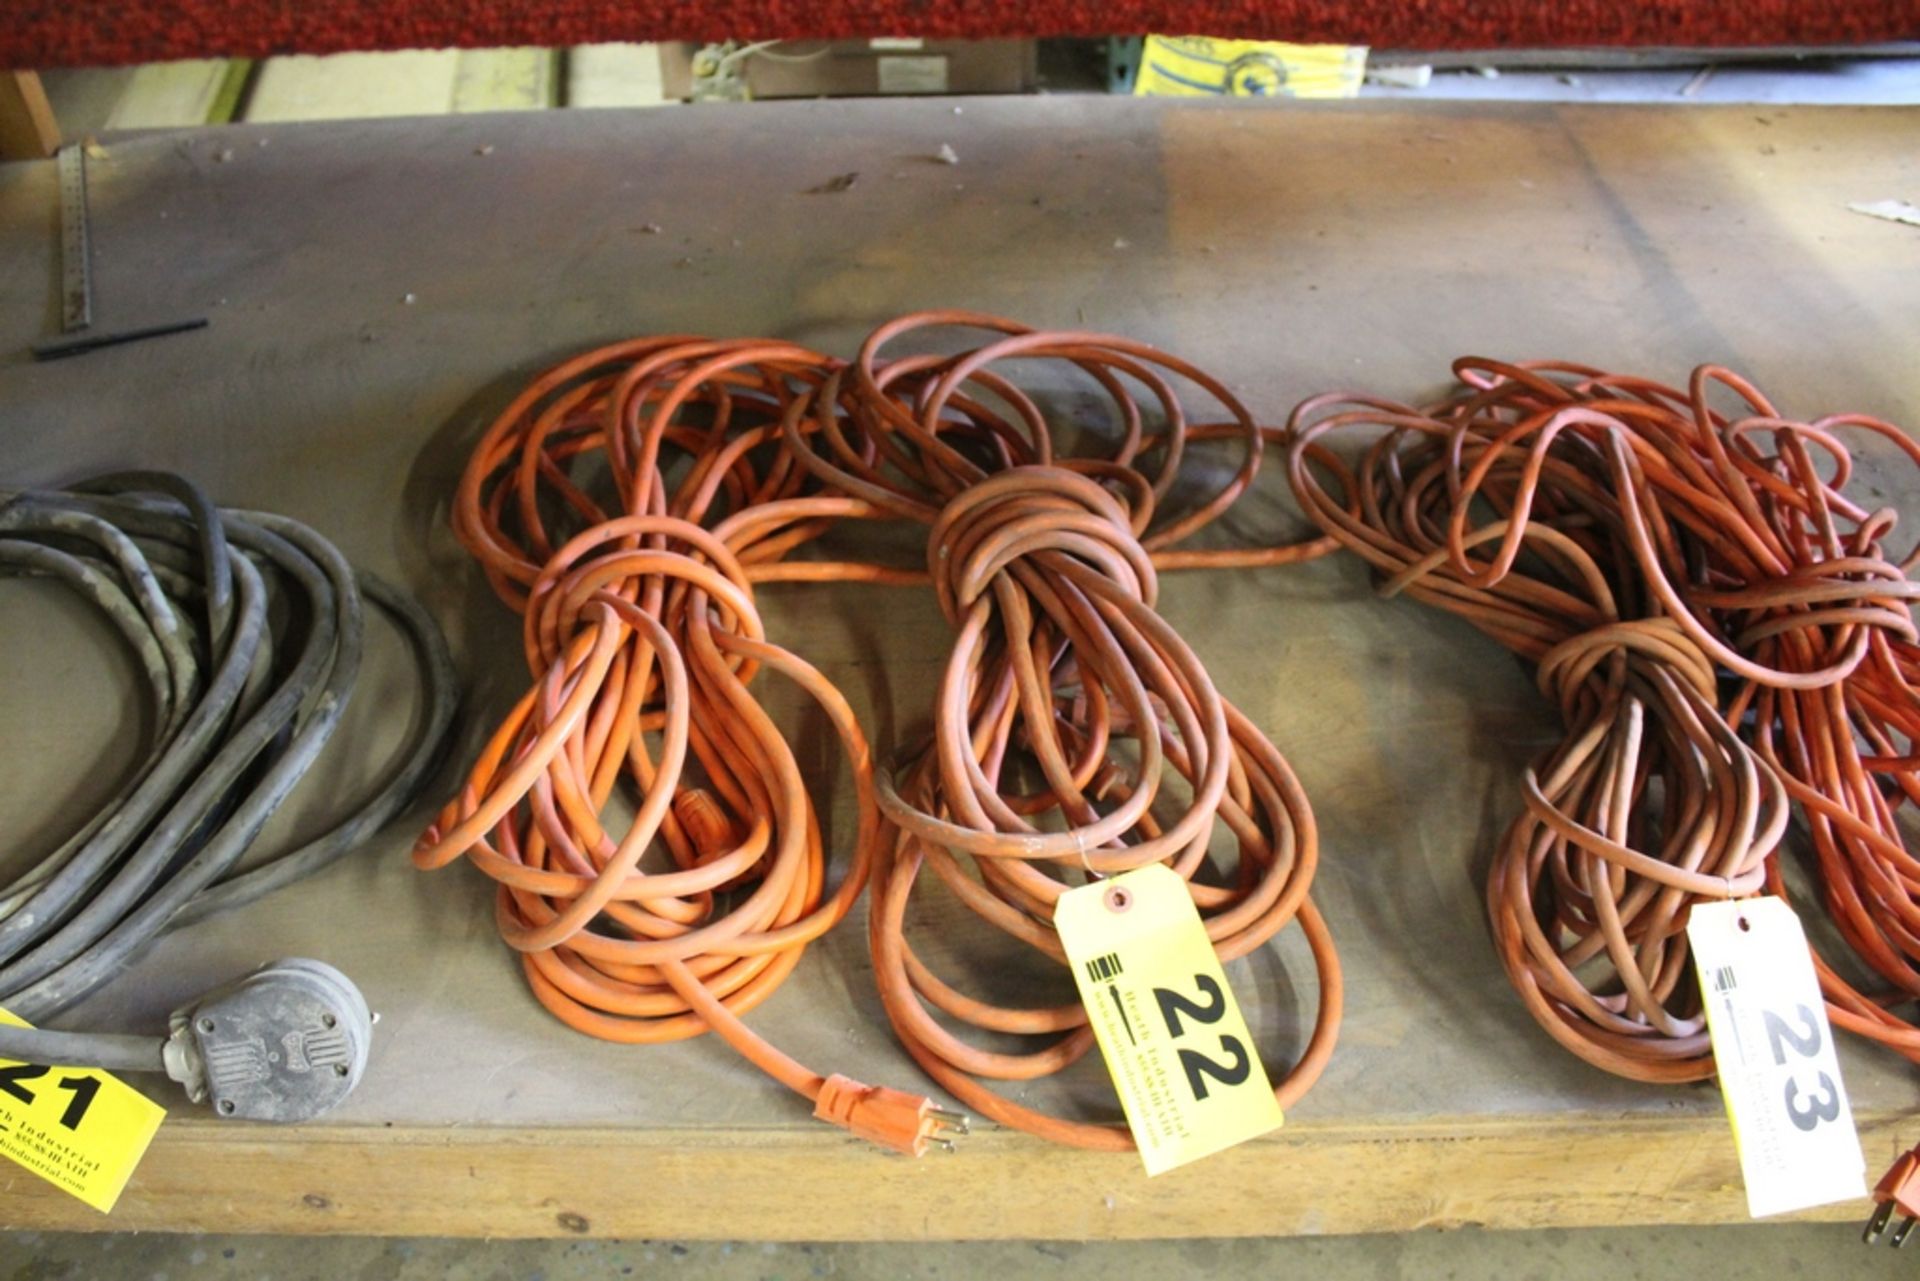 (2) HEAVY DUTY EXTENSION CORDS